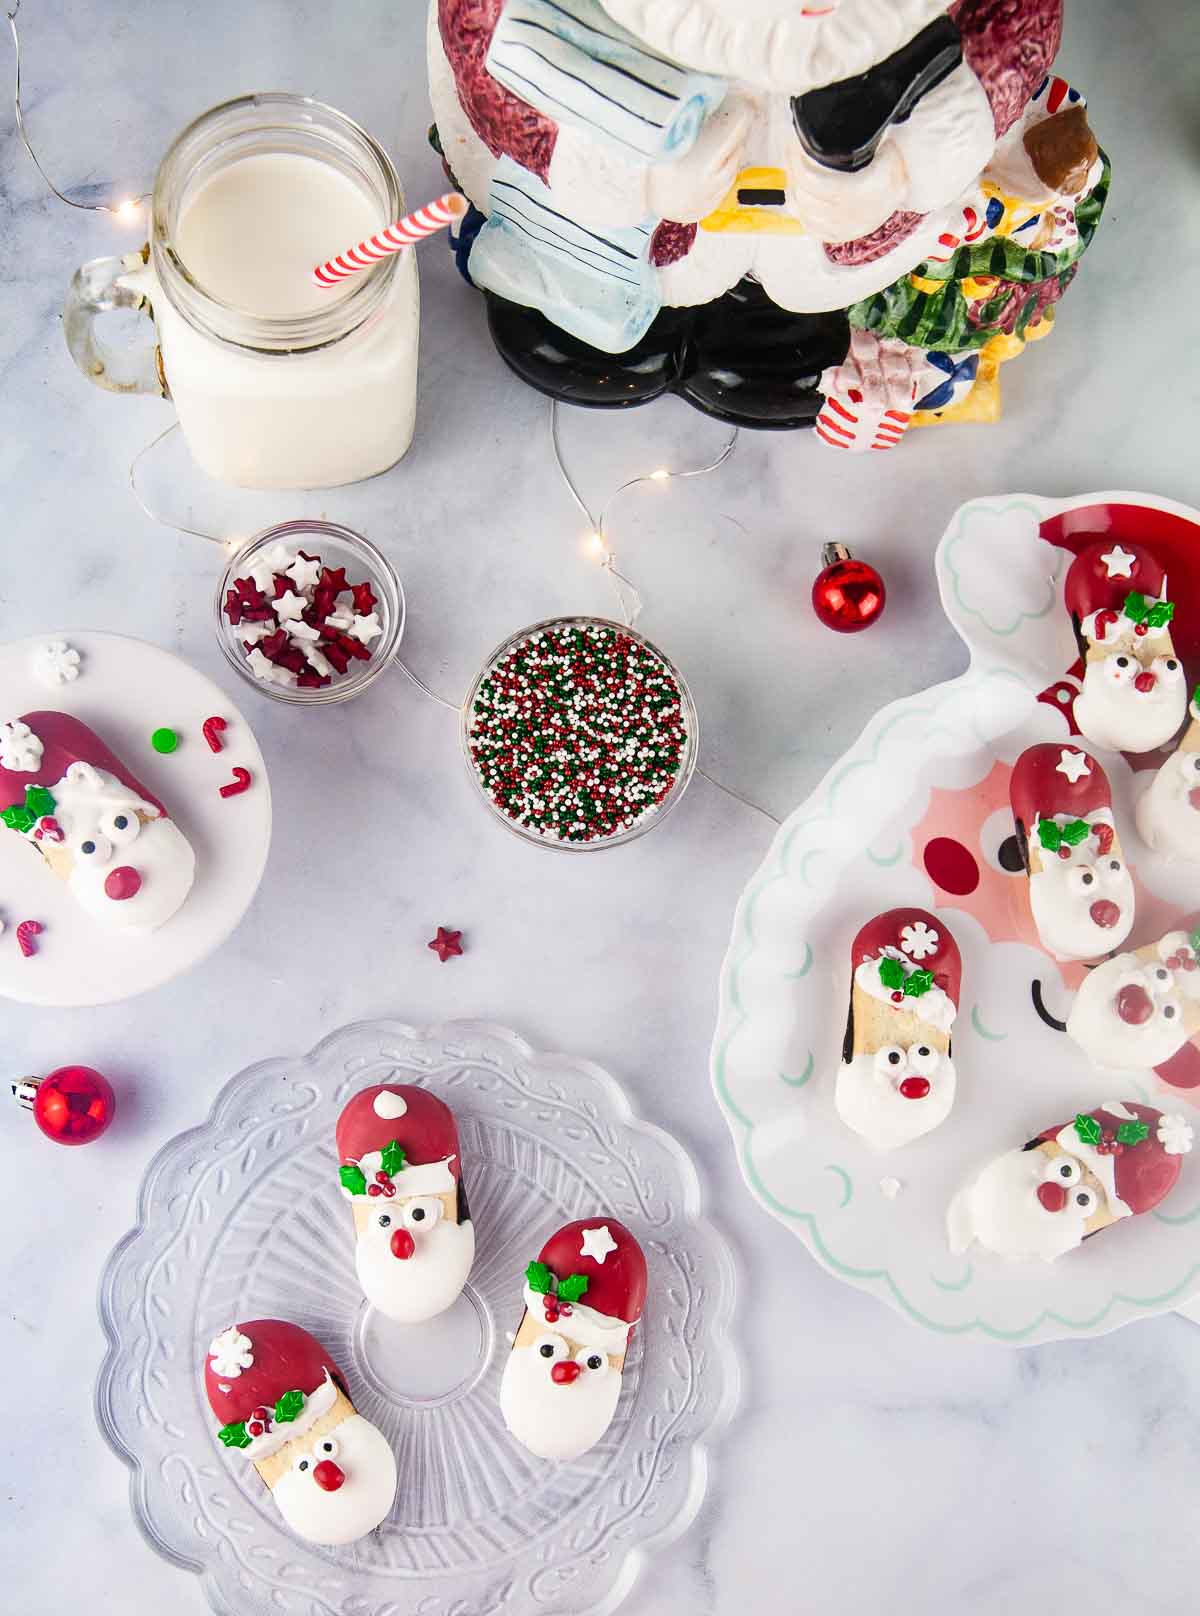 Easy Santa cookies are a festive addition to any Christmas dessert spread or perfect to leave out for the big guy himself on Christmas Eve.